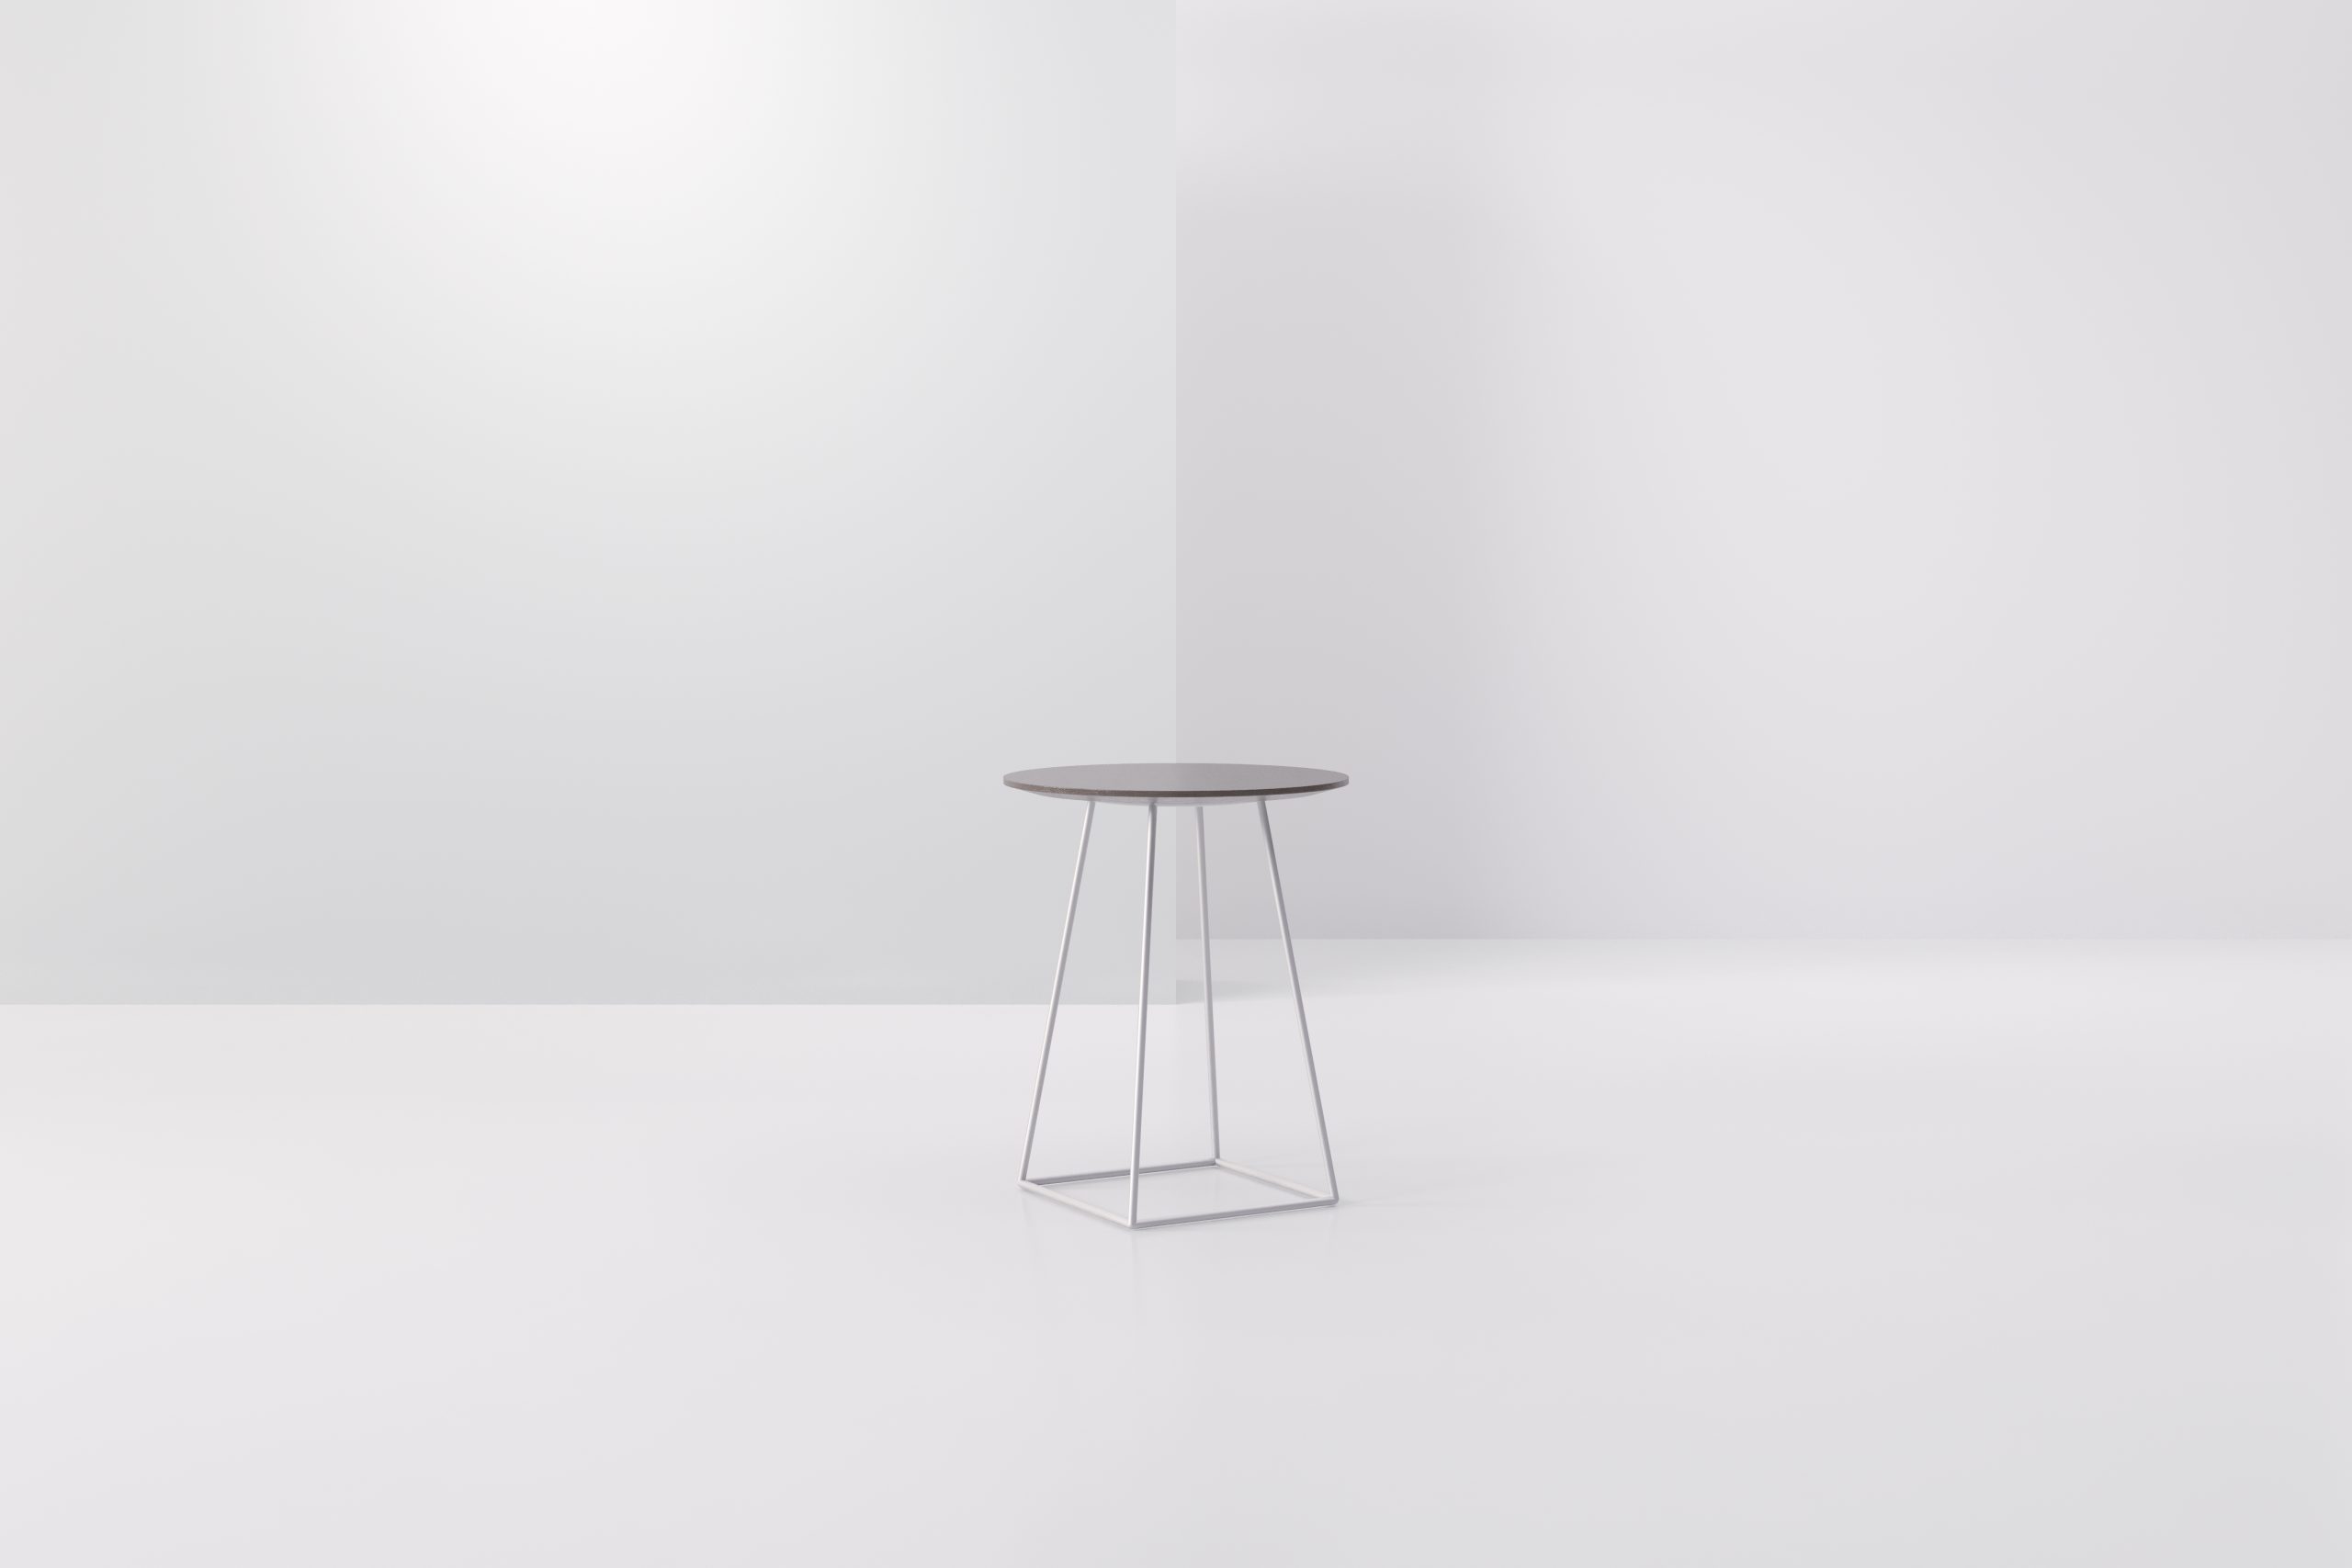 Dayton Small Round End Table Product Image 1